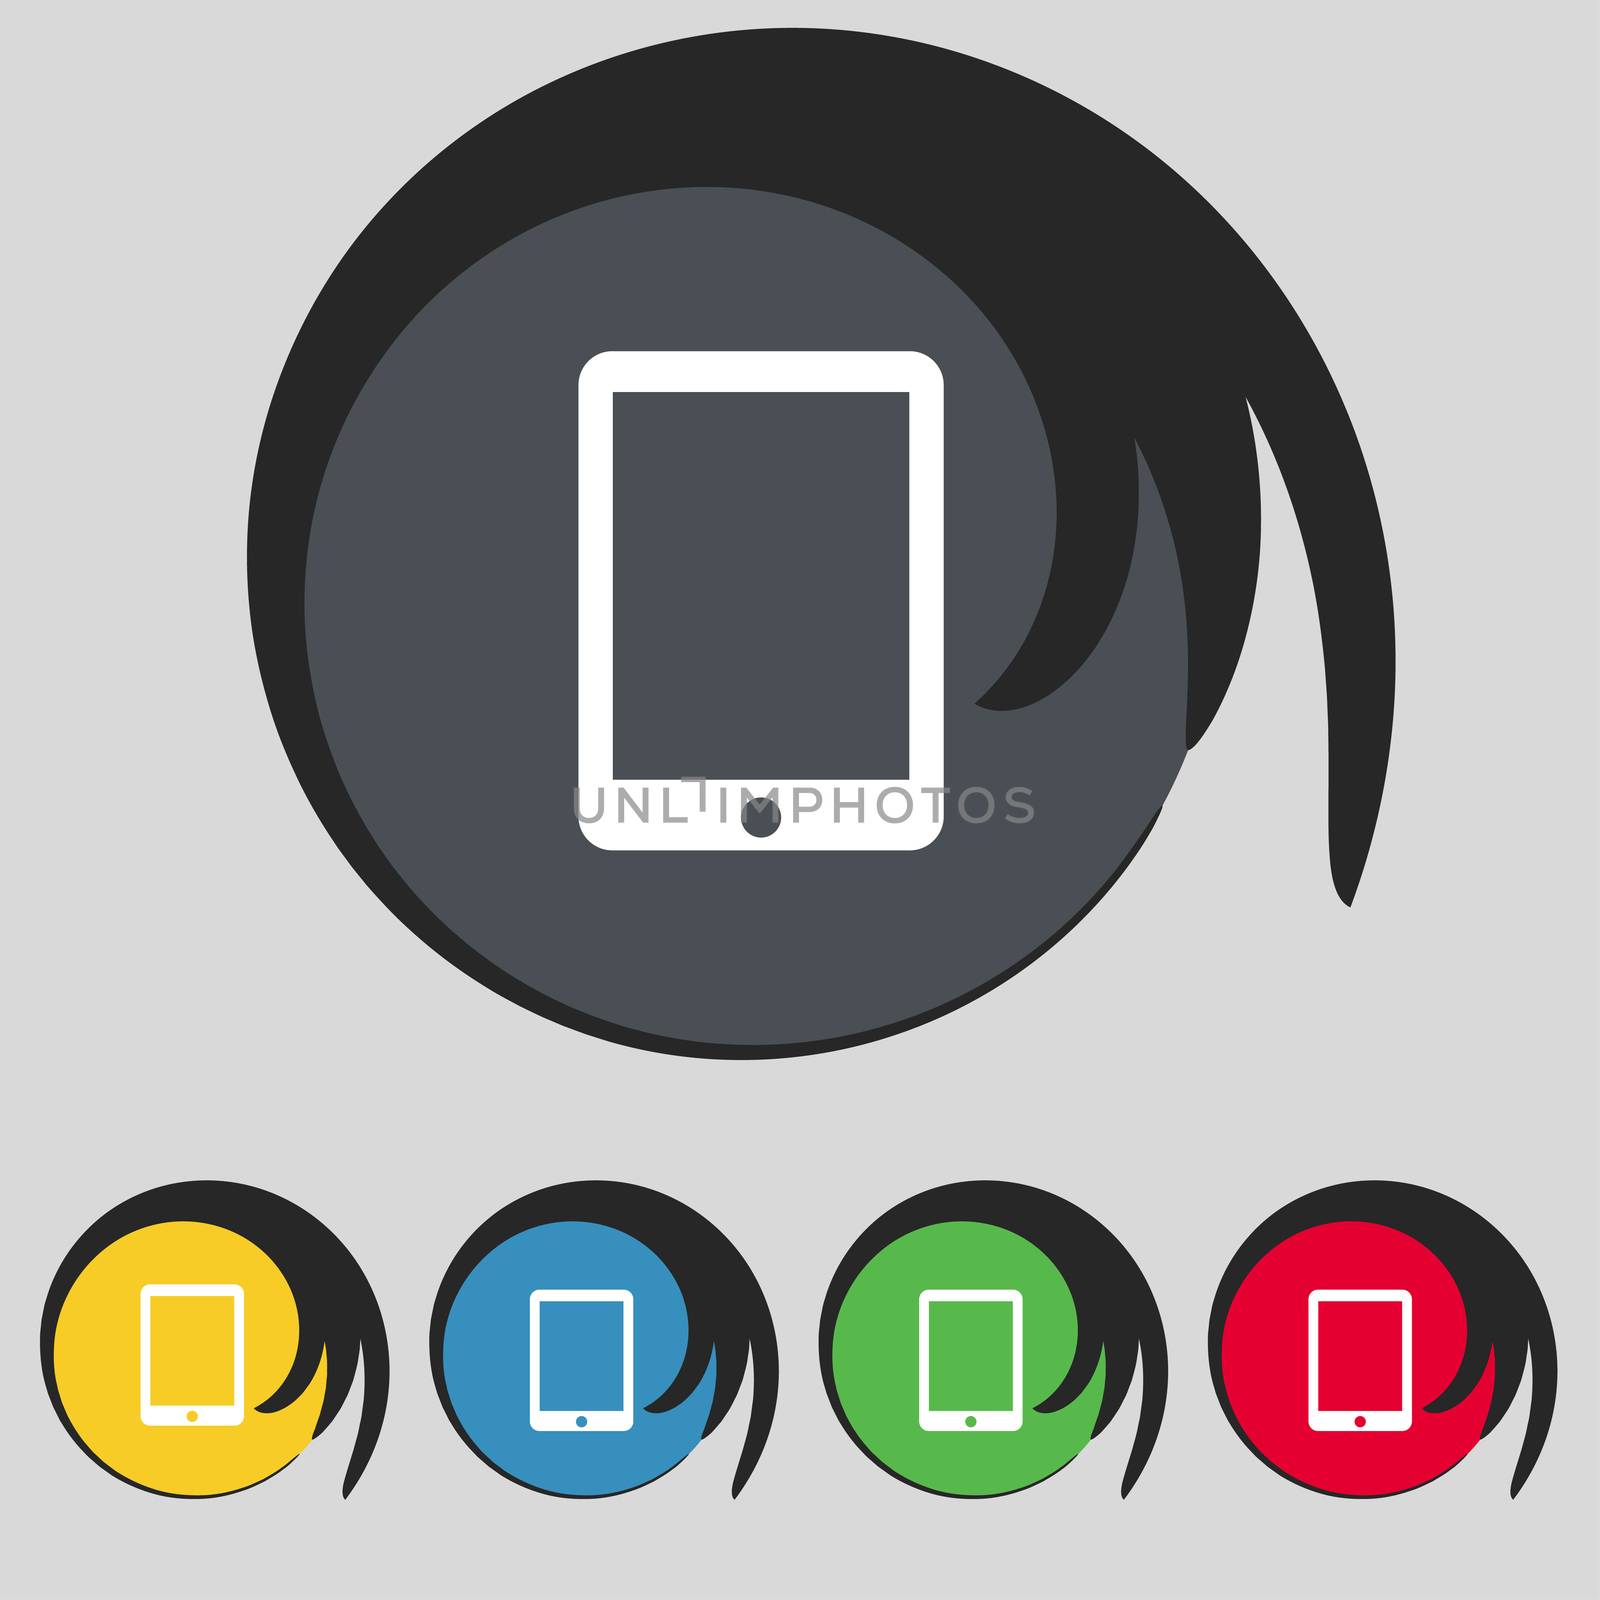 Tablet sign icon. smartphone button. Set colur buttons. illustration